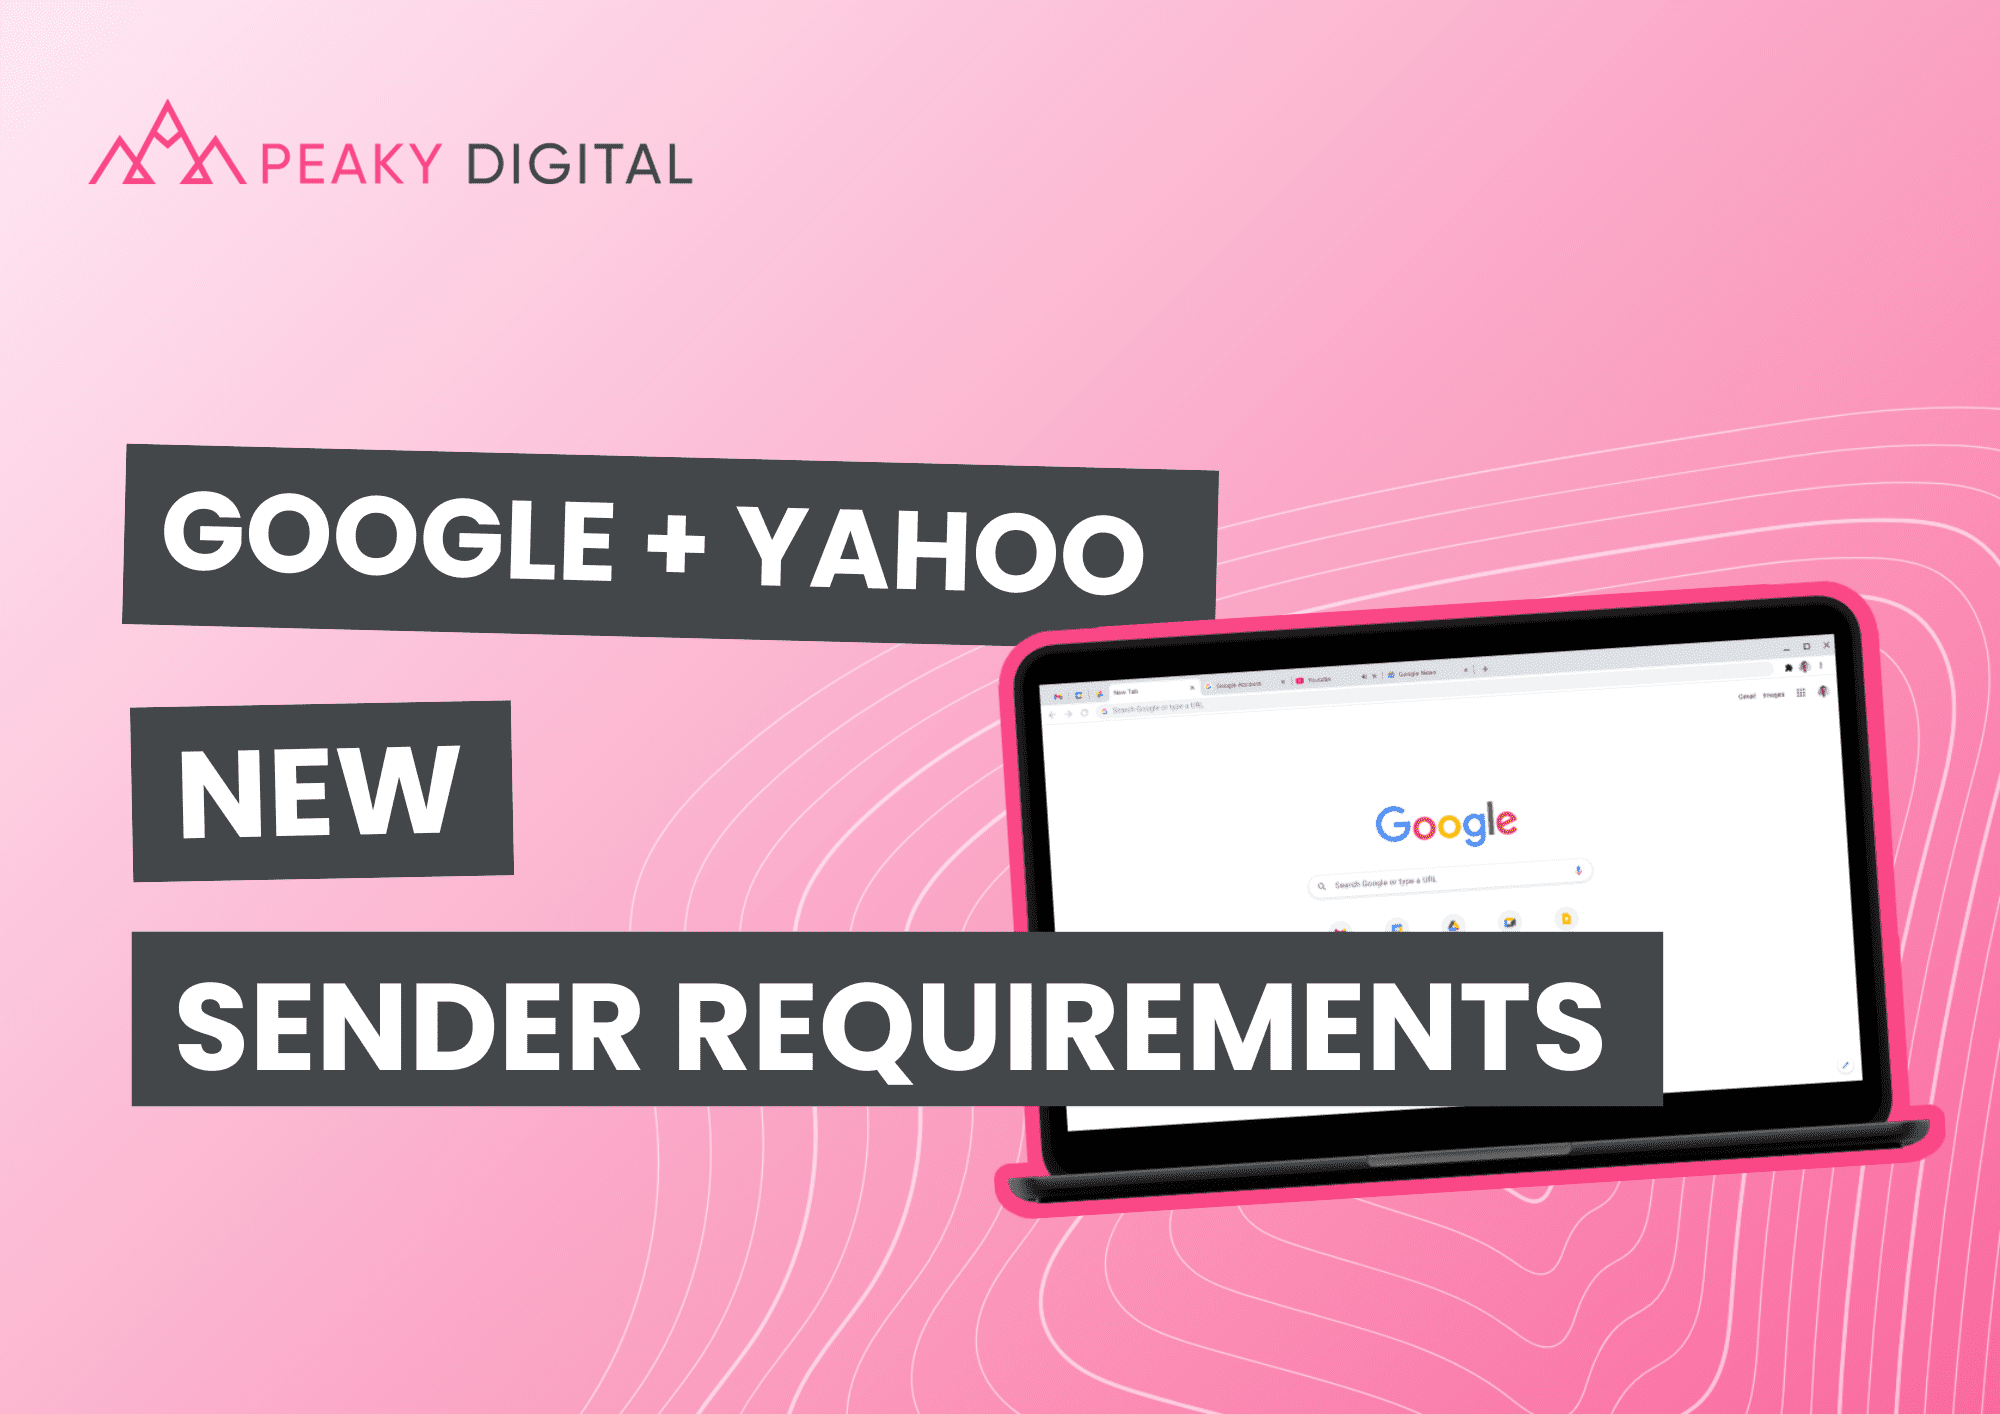 New email marketing sender requirements being introduced by google and yahoo.